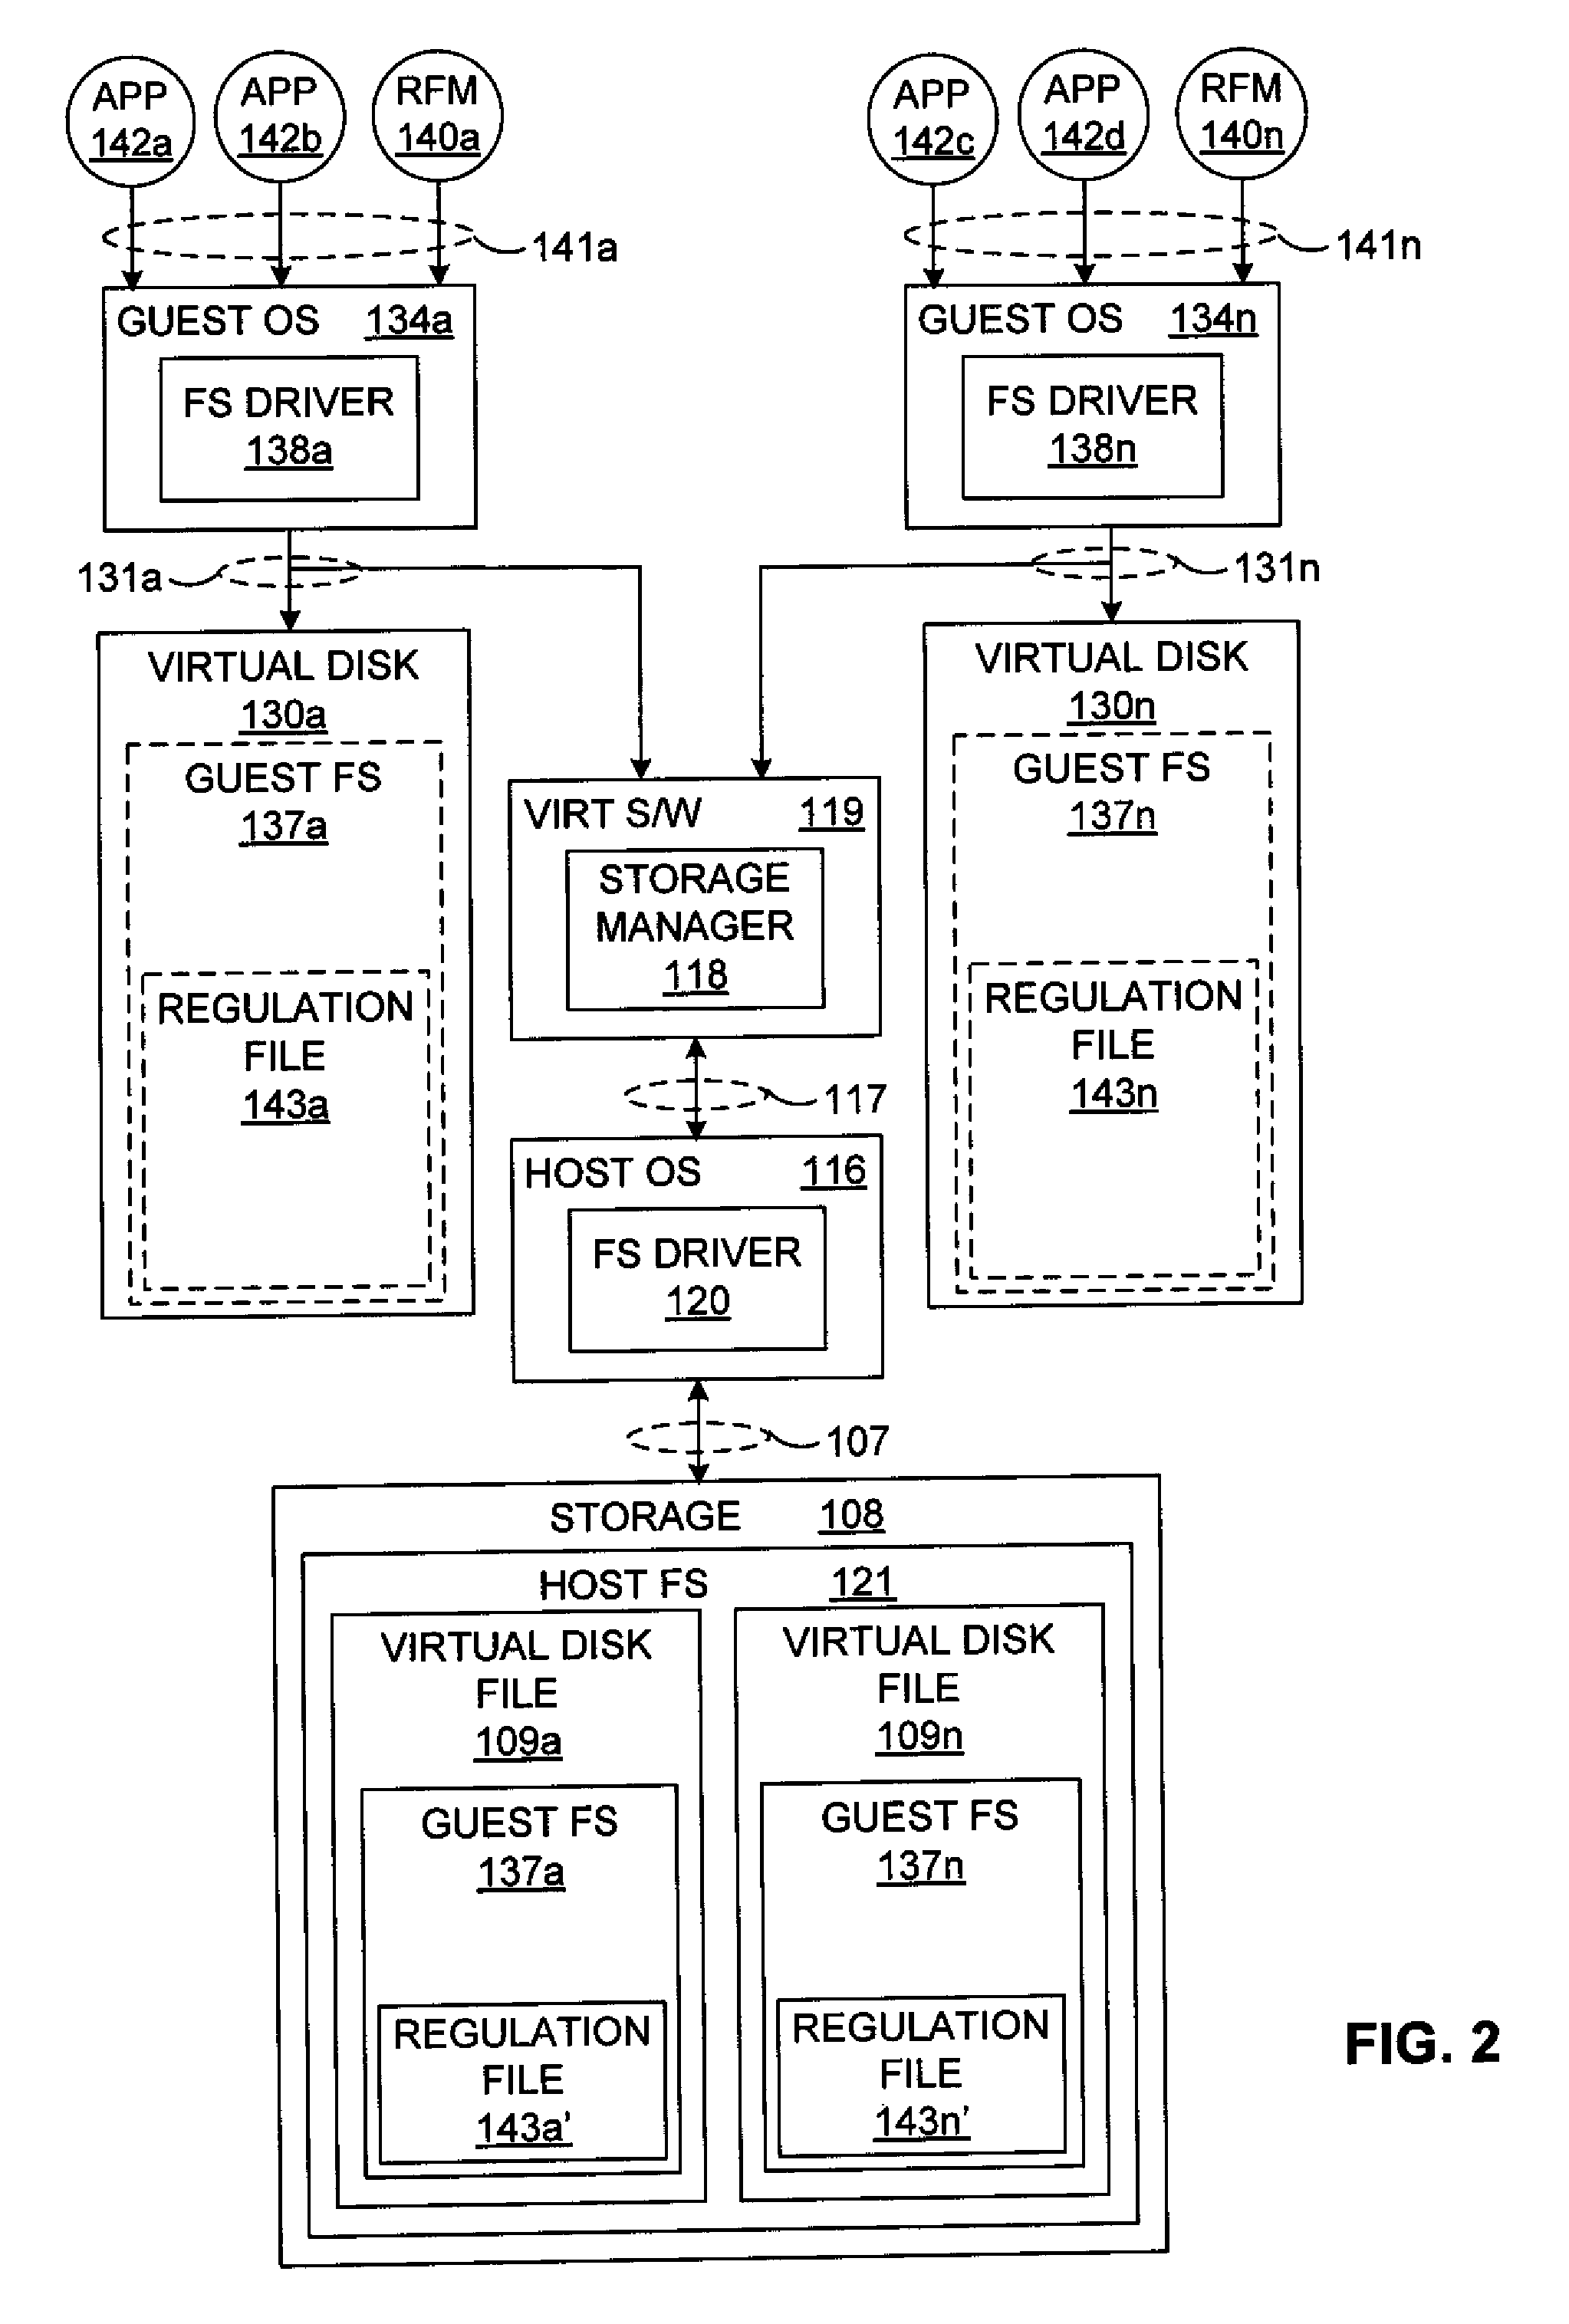 Adjusting Available Persistent Storage During Execution in a Virtual Computer System